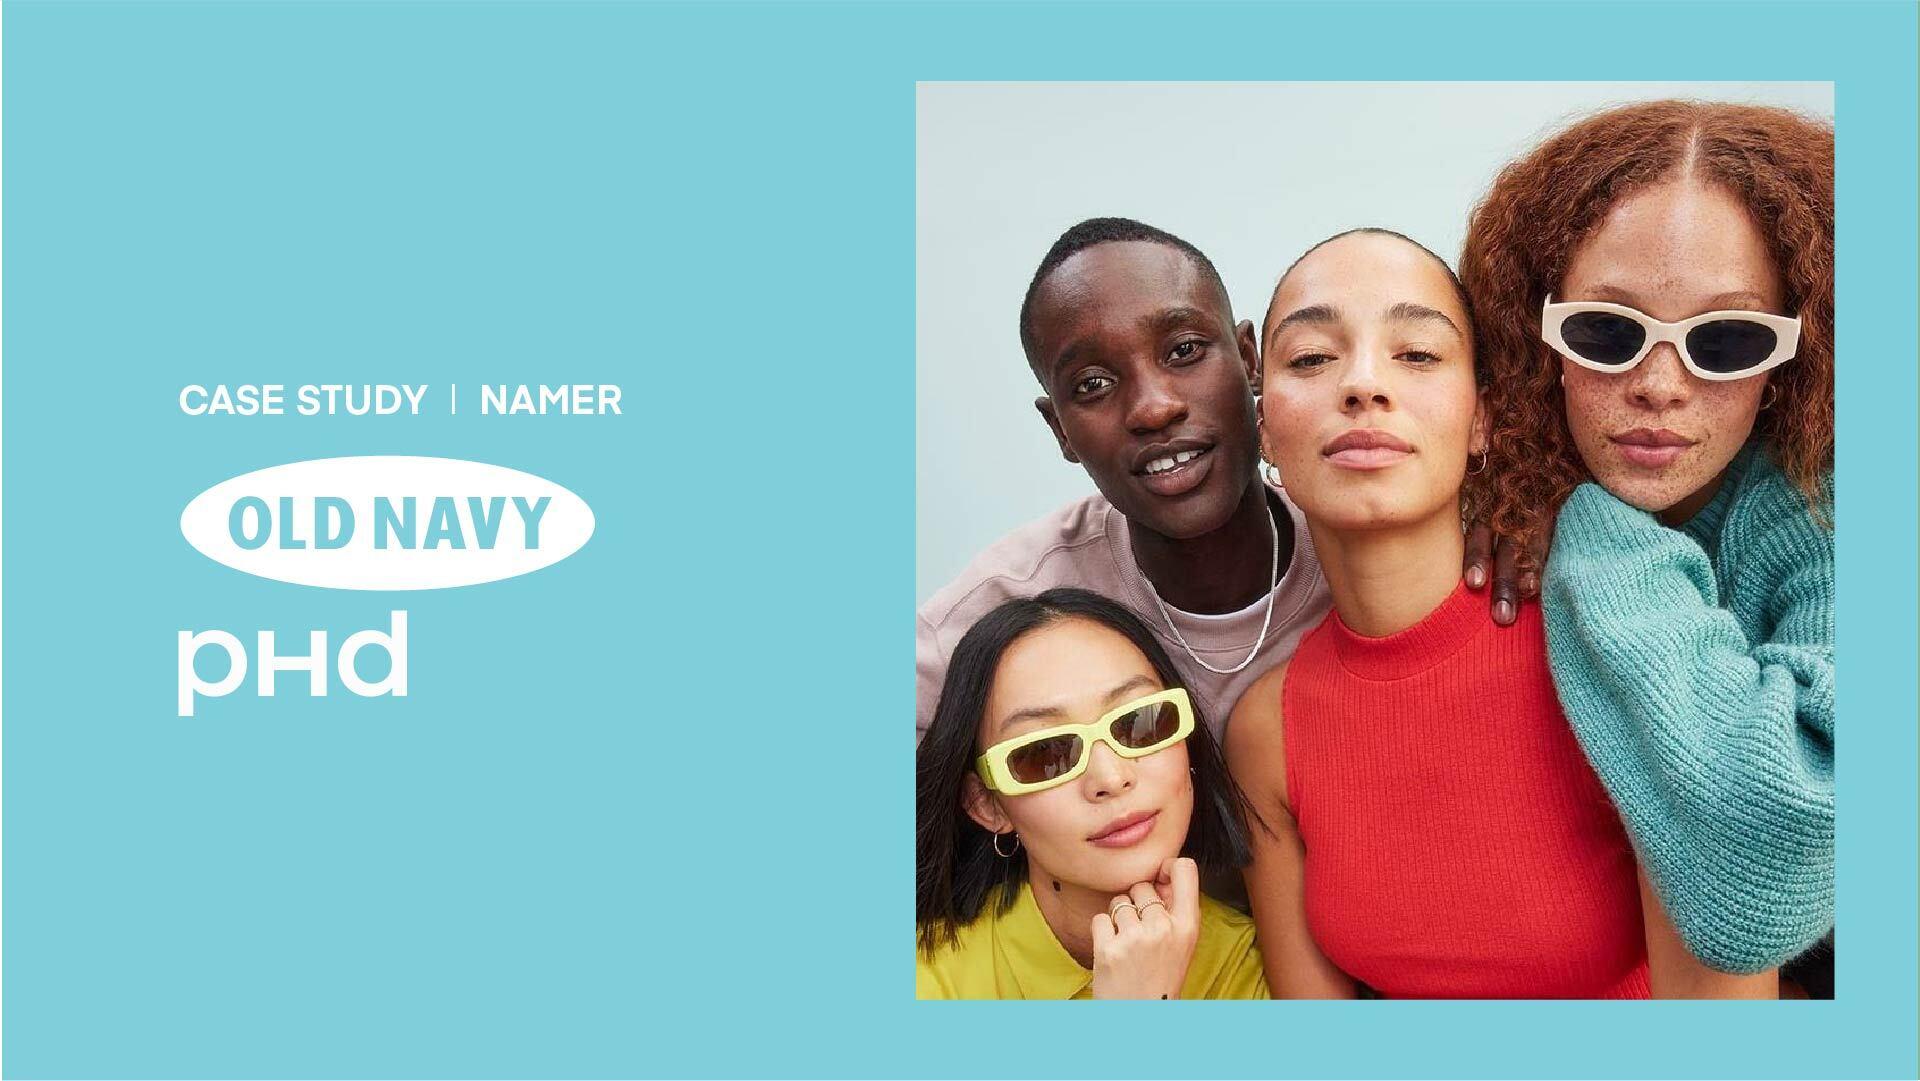 Blue background with four models to the right and the white text to the left "Case Study | NAMER - Old Navy + PHD"